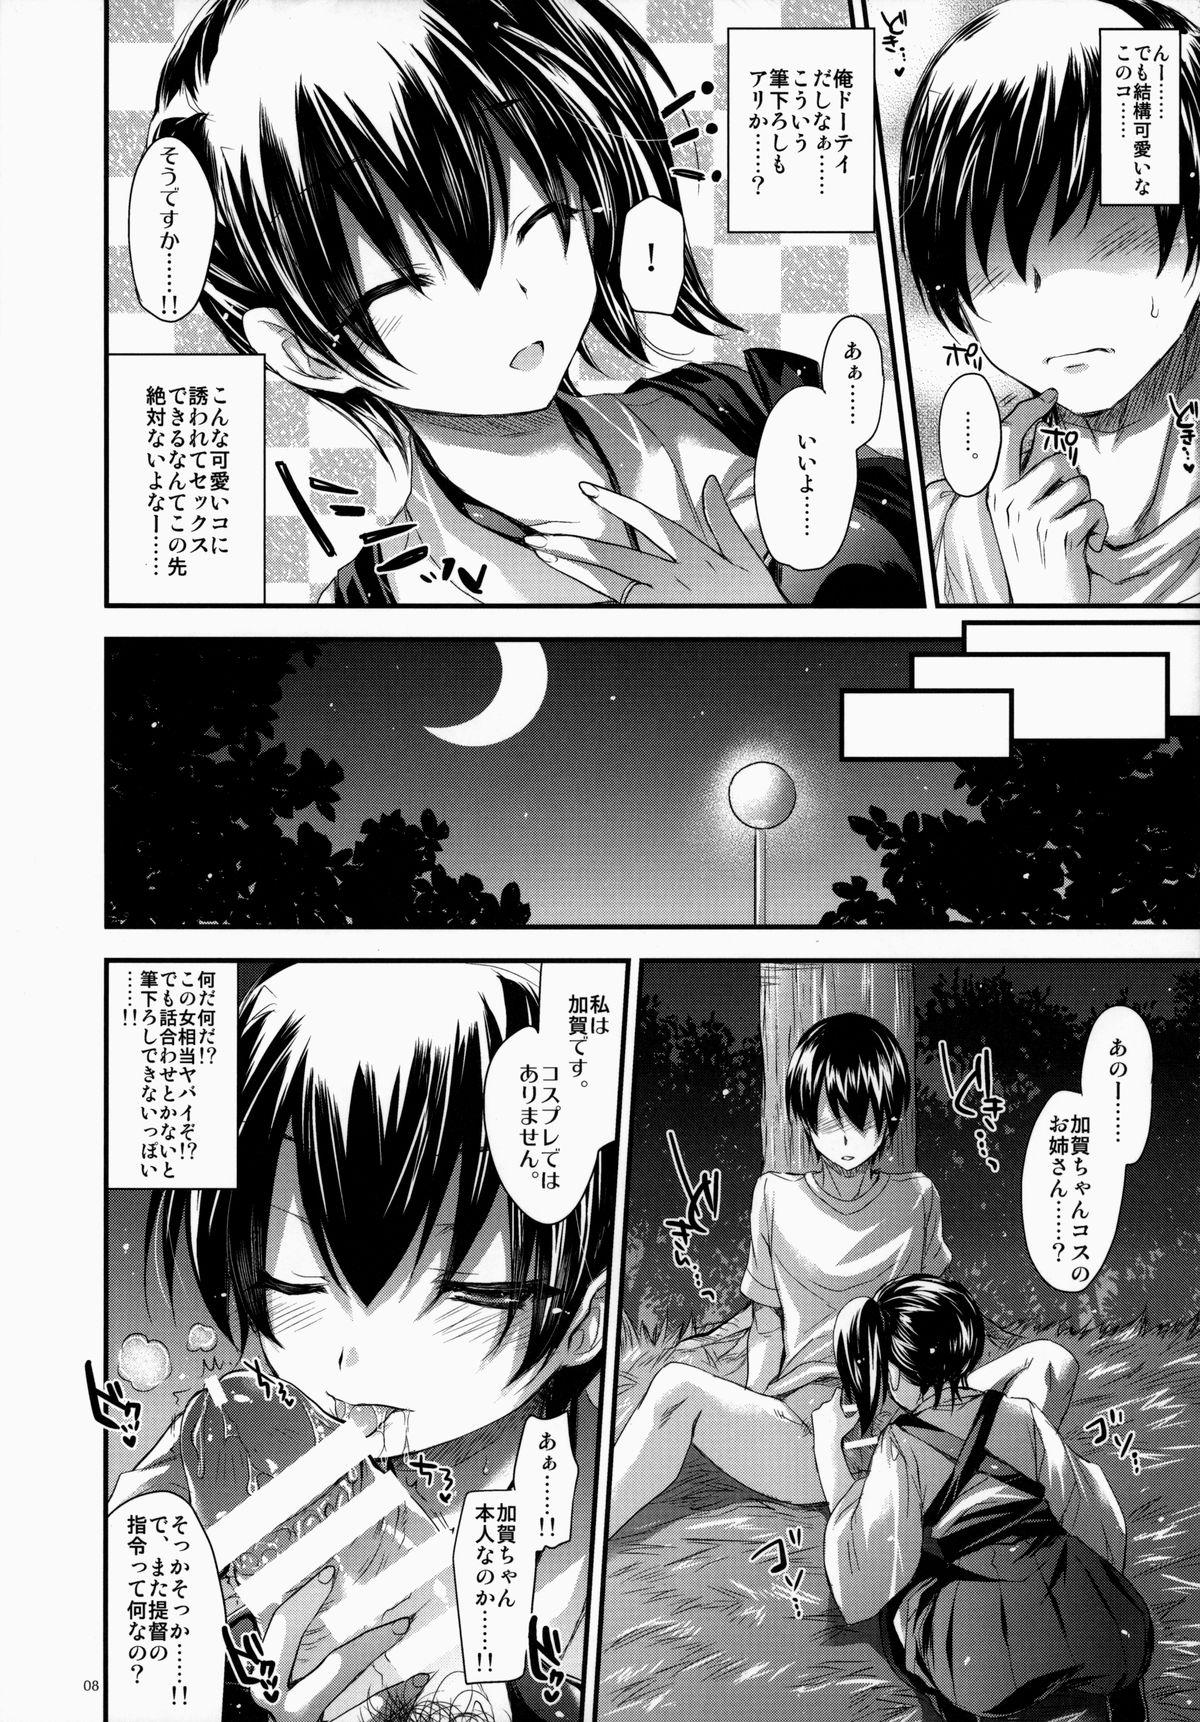 Fit GARIGARI 63 - Kantai collection Petite Teen - Page 8